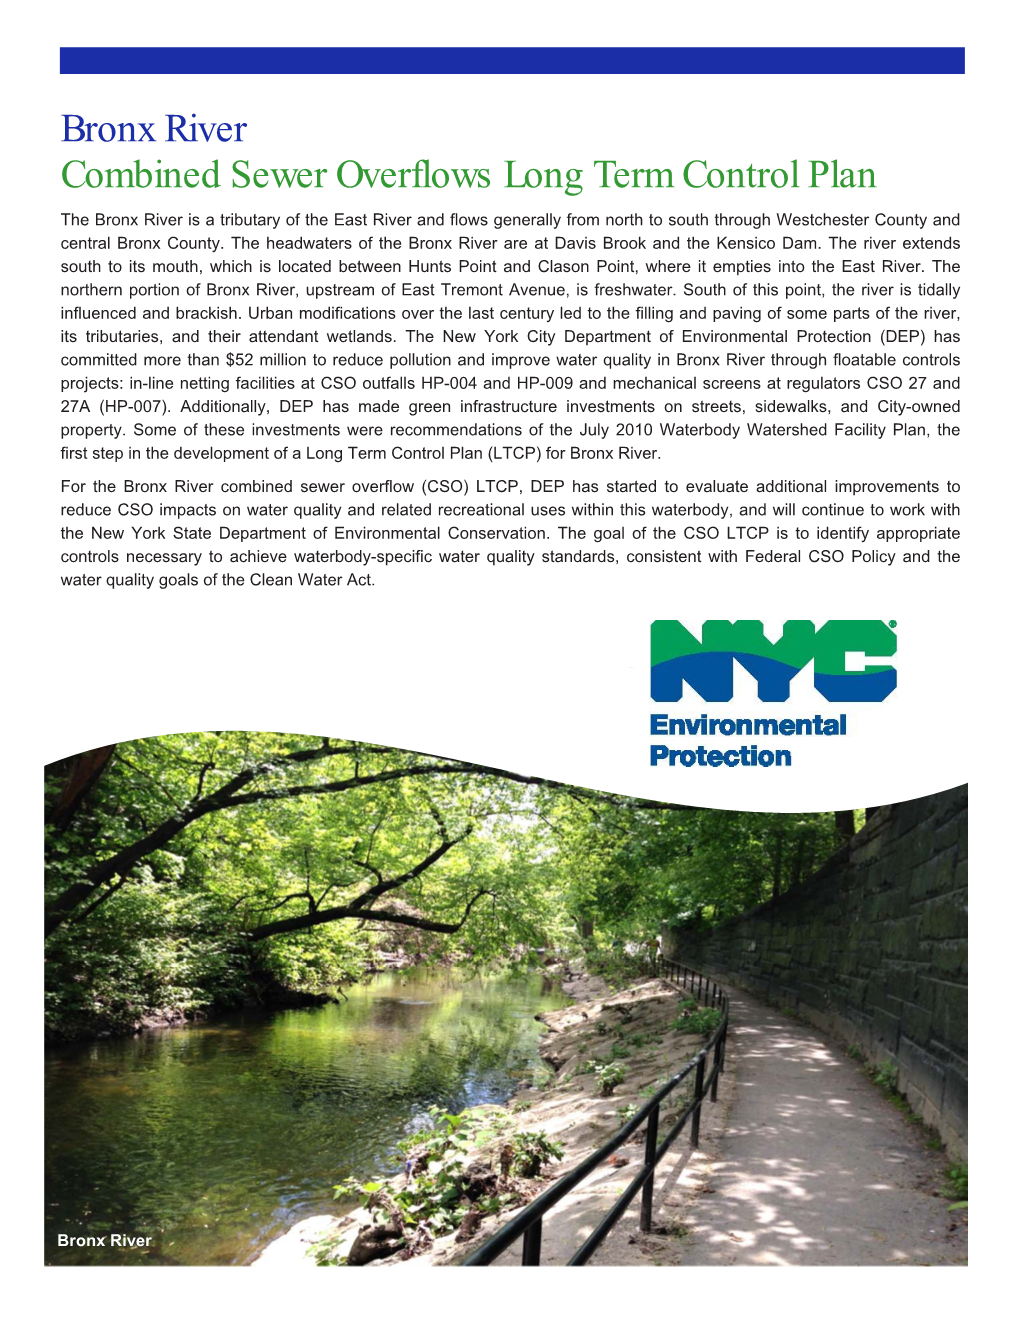 Bronx River Combined Sewer Overflows Long Term Control Plan